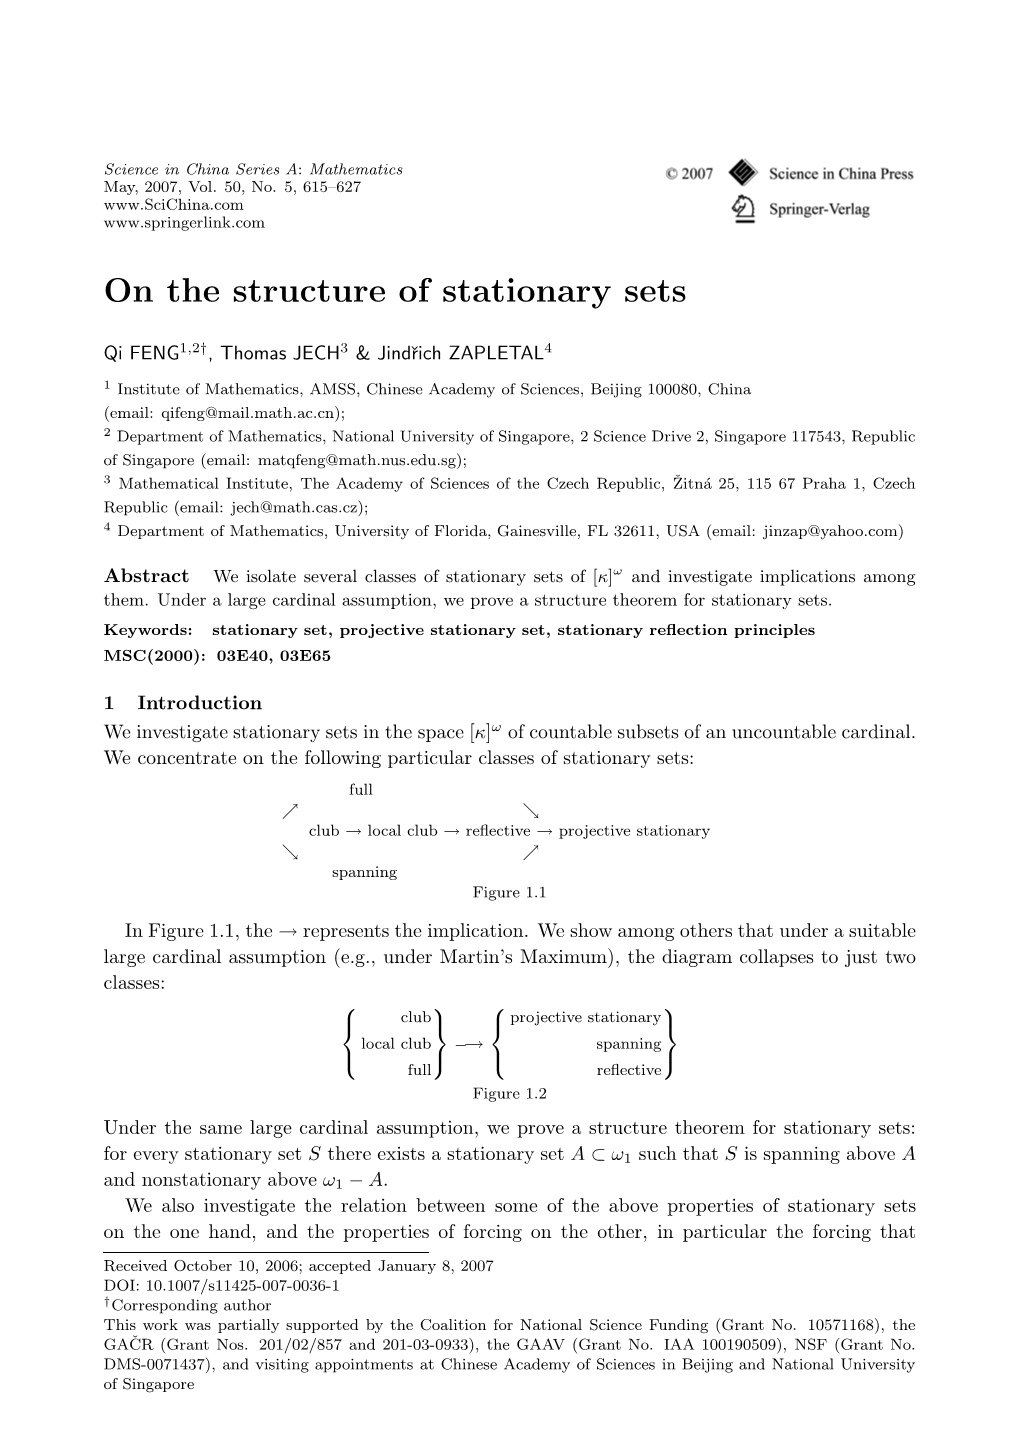 On the Structure of Stationary Sets